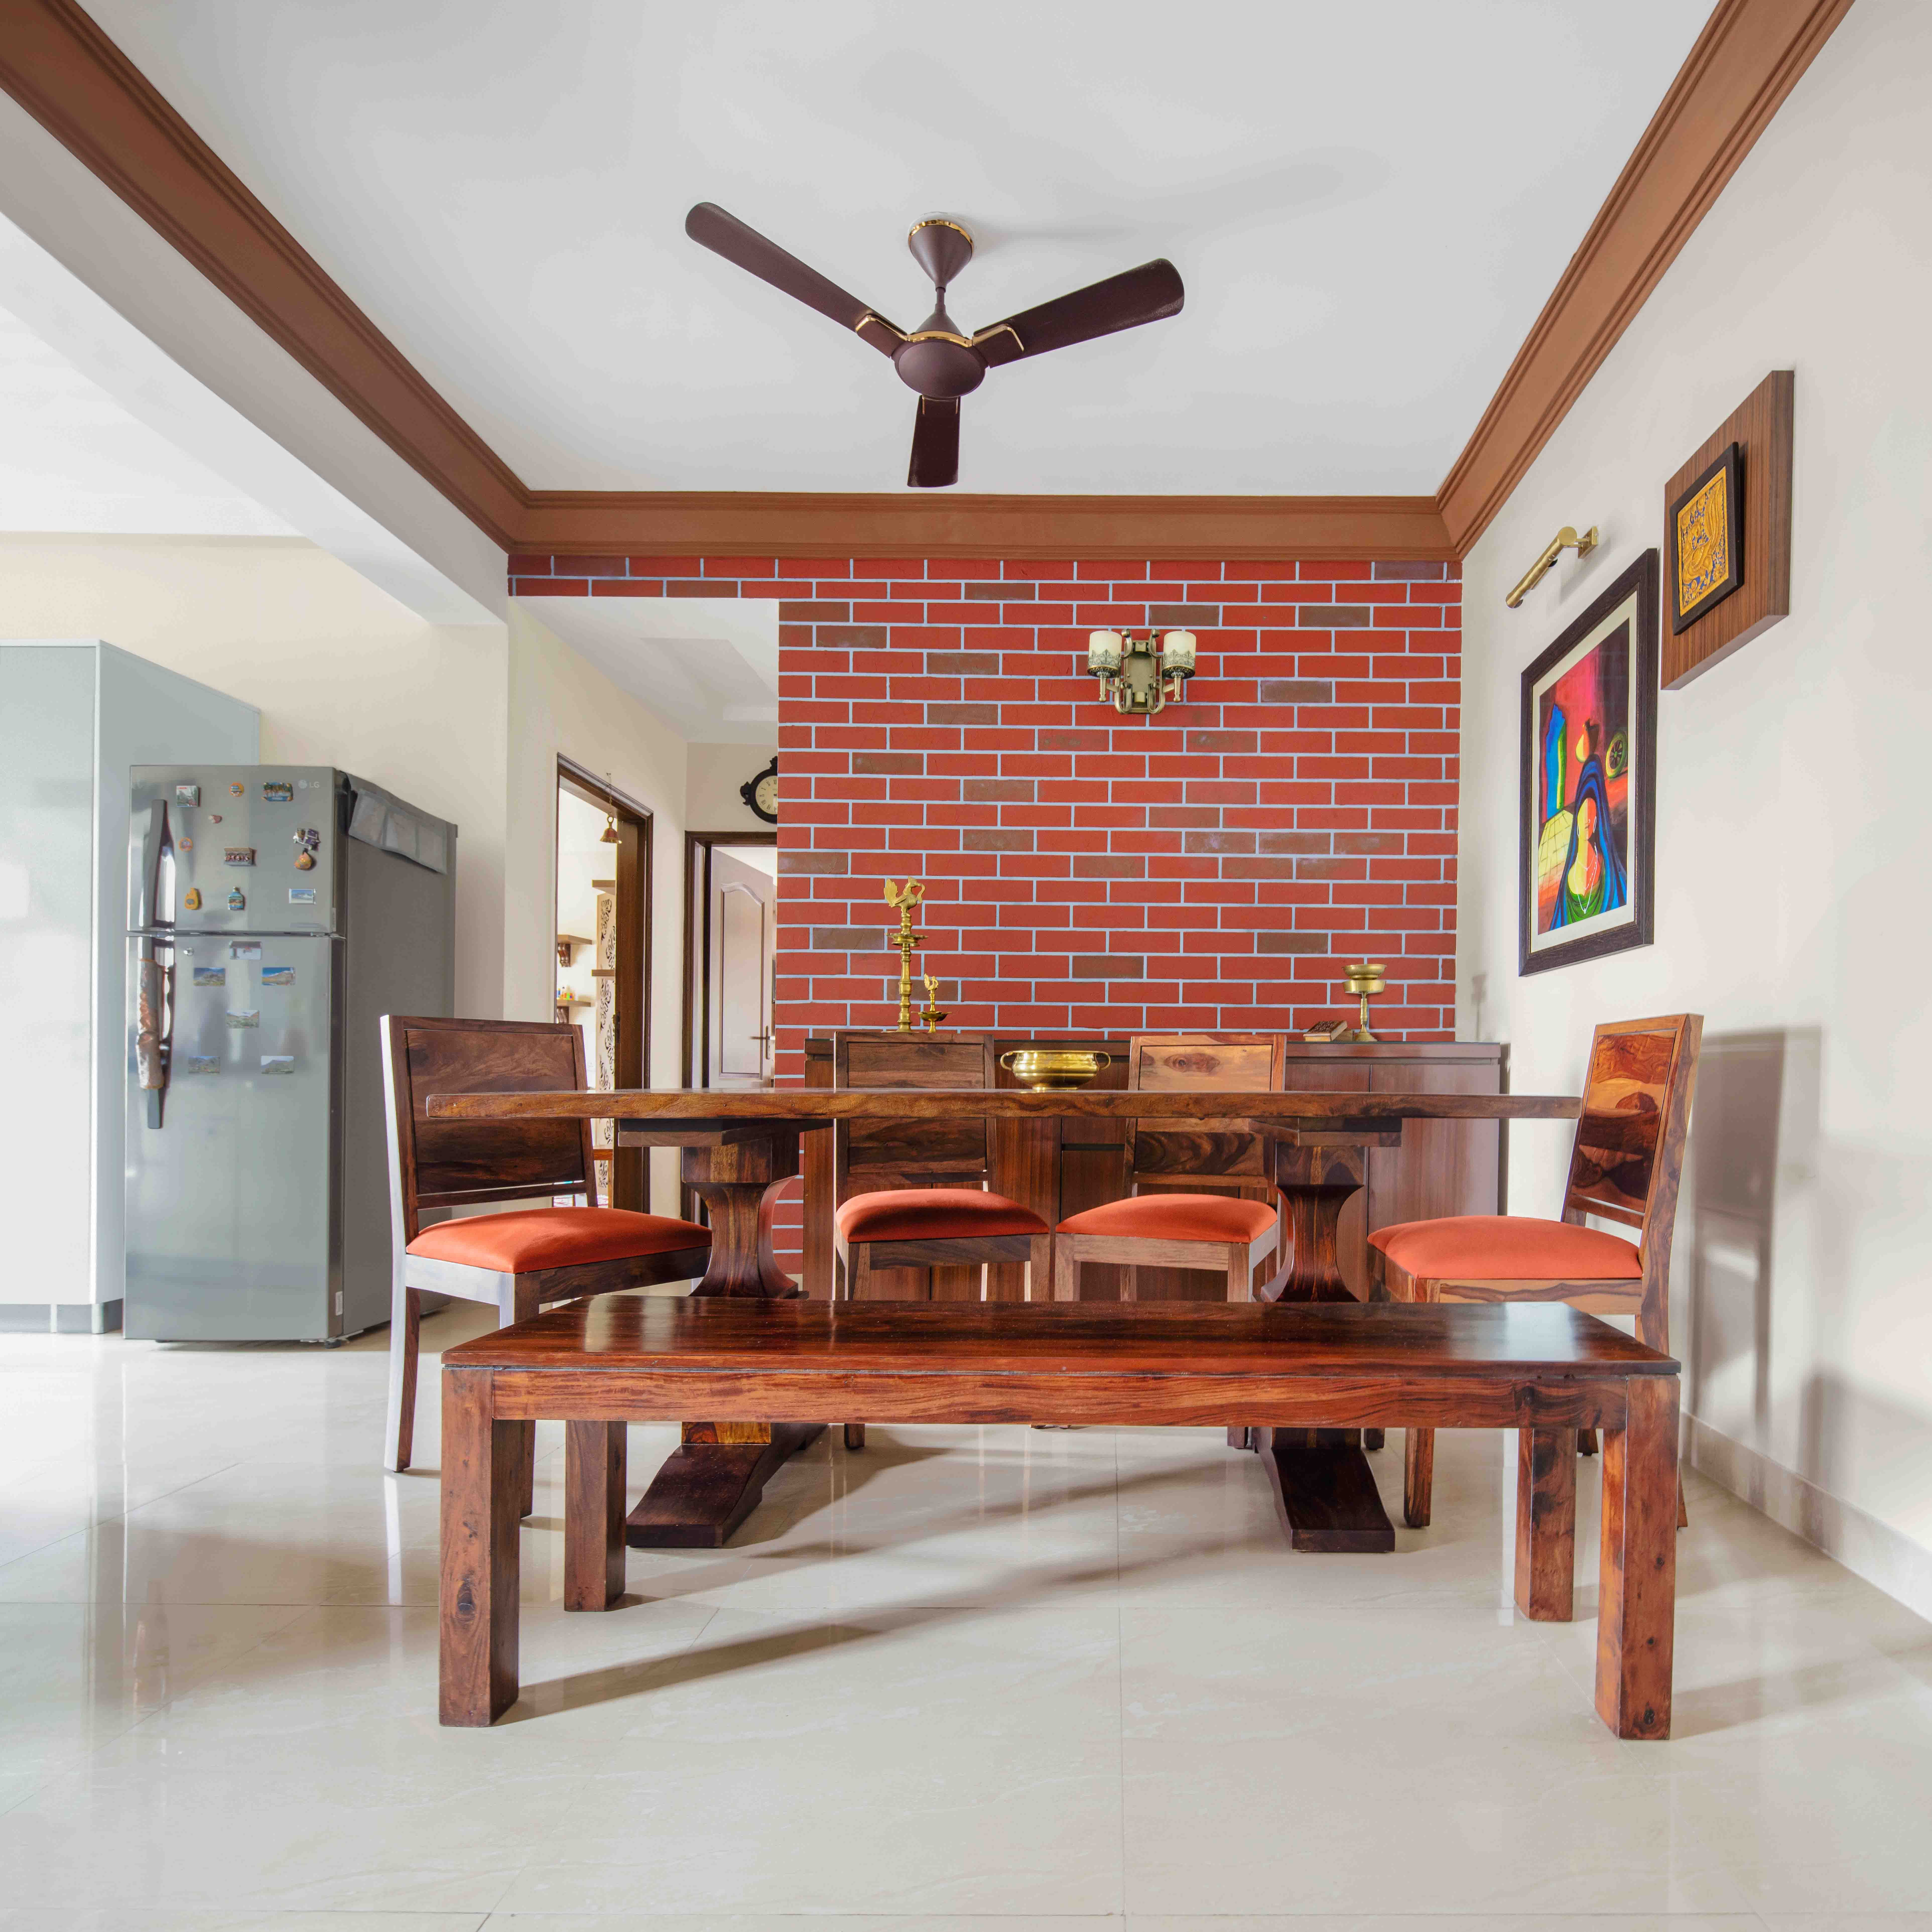 Transitional 1-BHK Flat In Noida With Closed Wooden Mandir Design